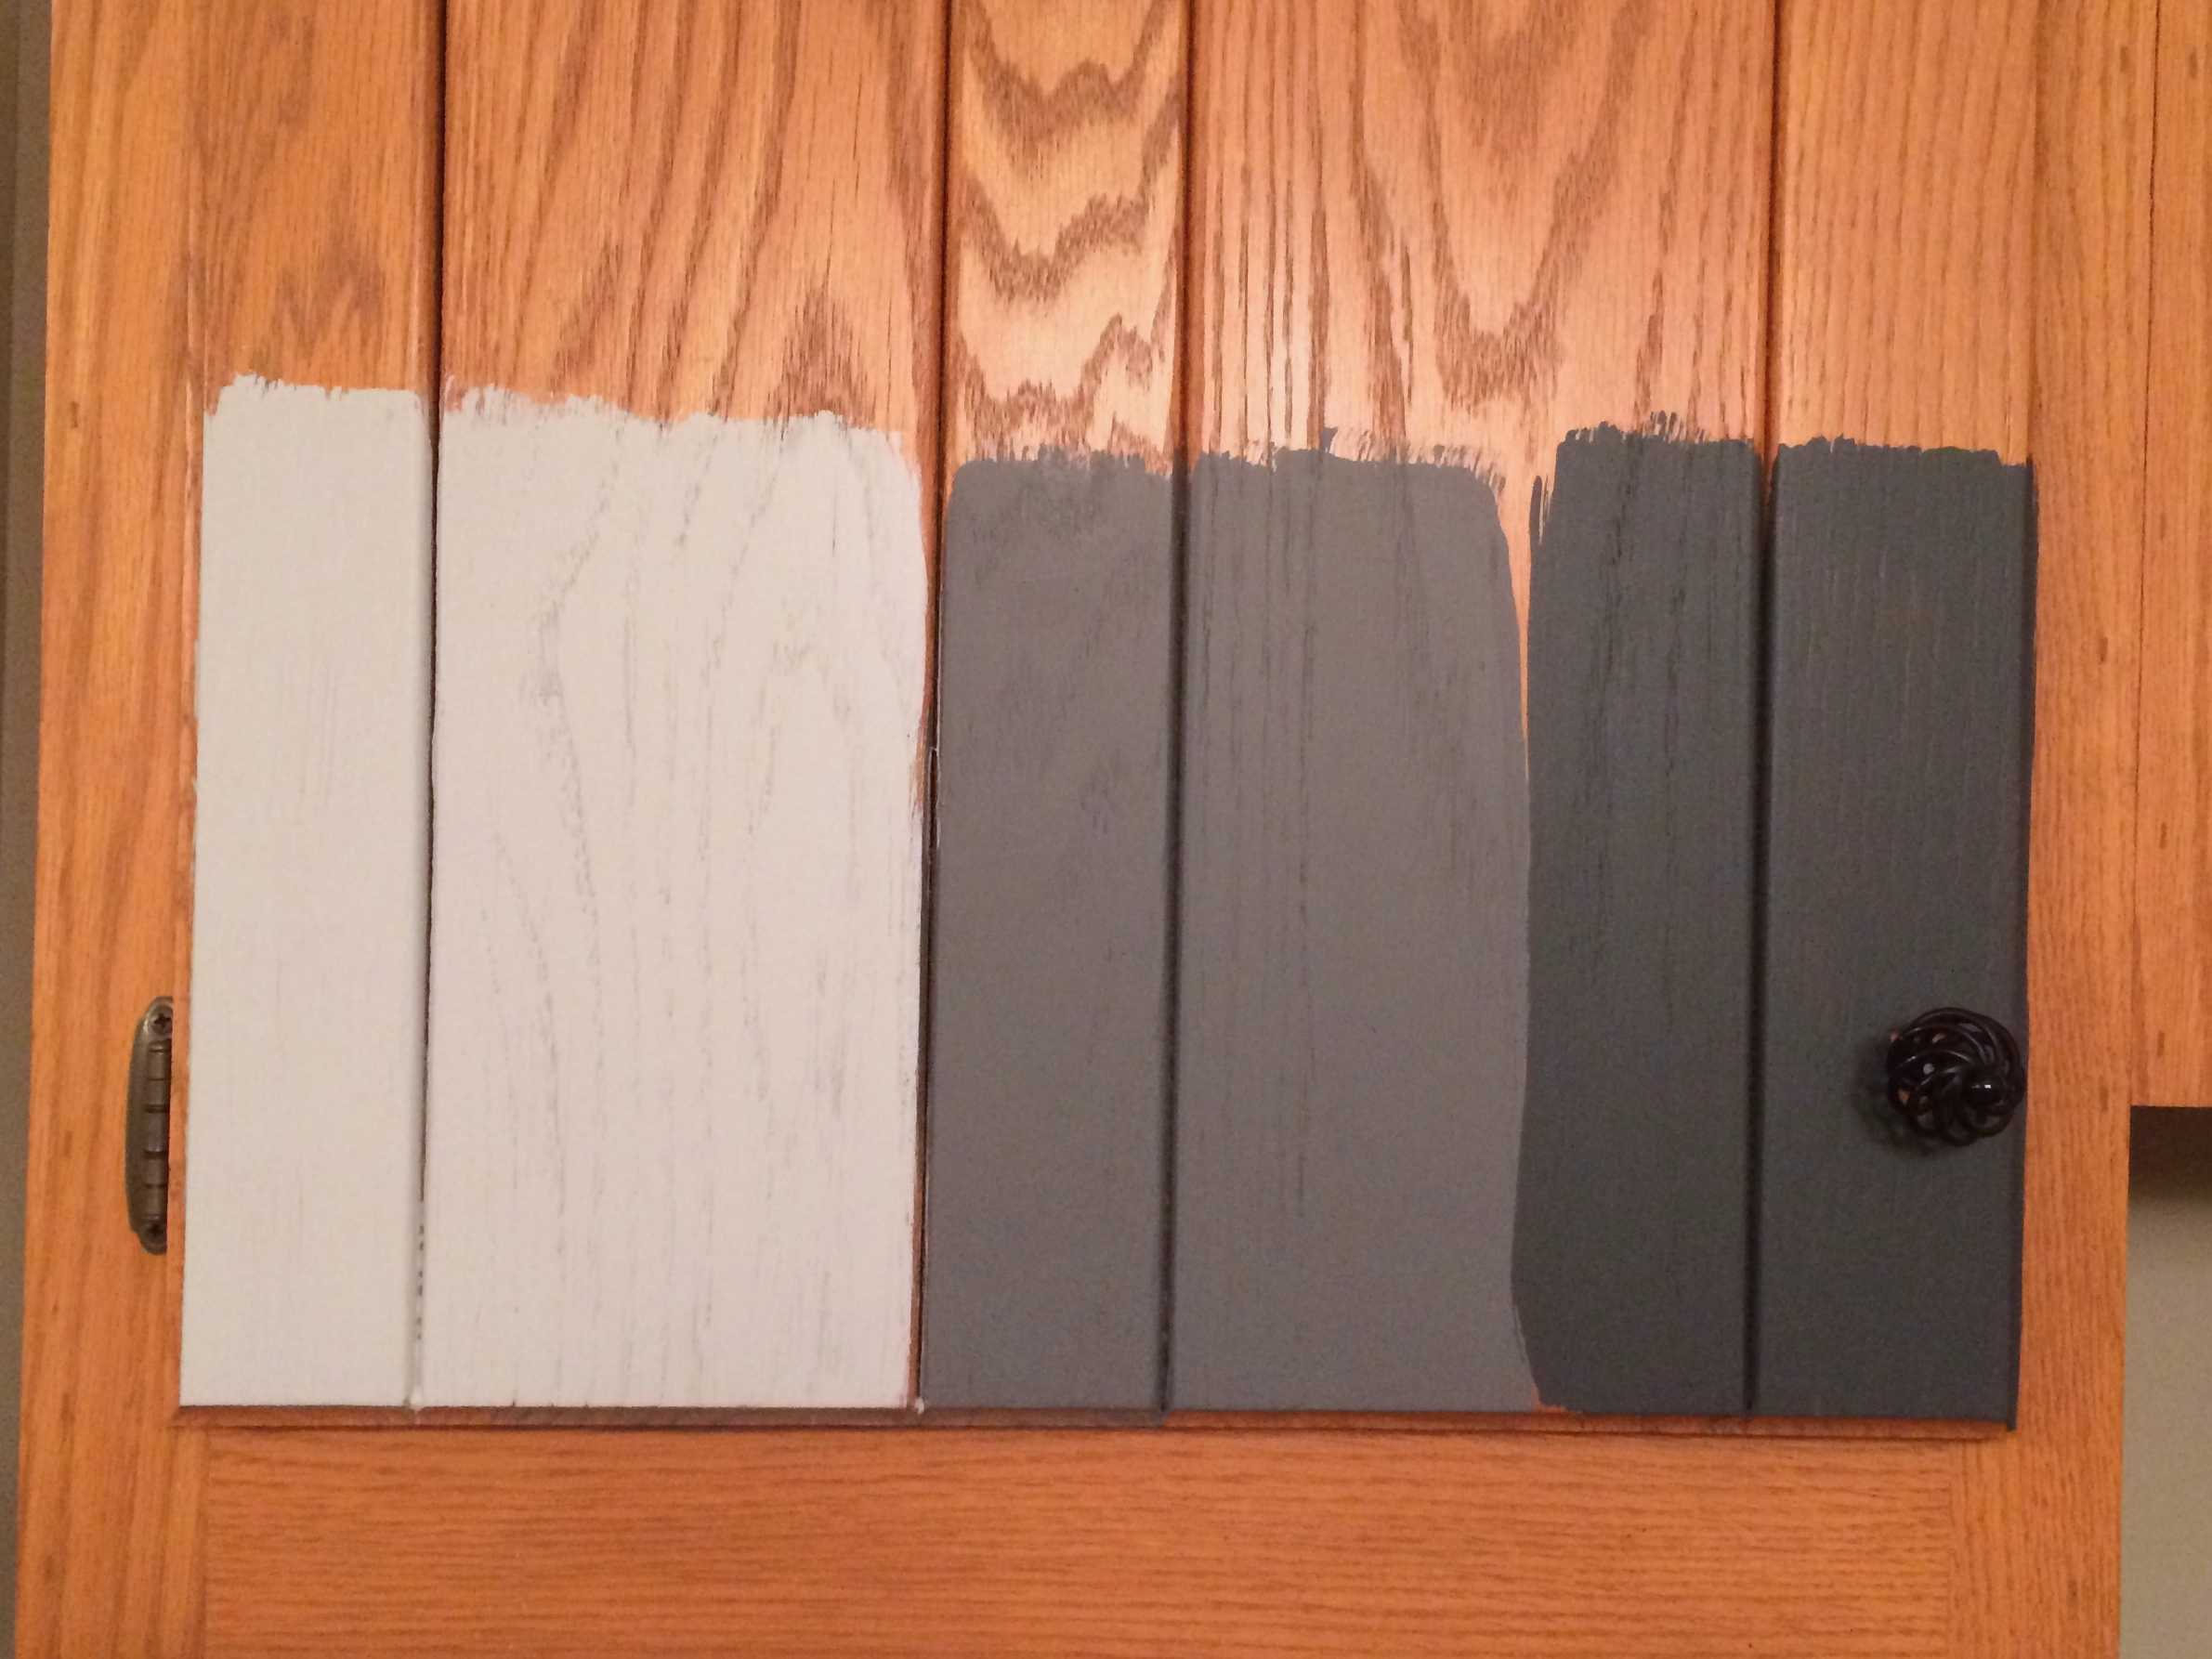 how to paint kitchen cabinets without sanding or priming- paint samples on outdated oak cabinets by Tasha Agruso of Kaleidoscope Living